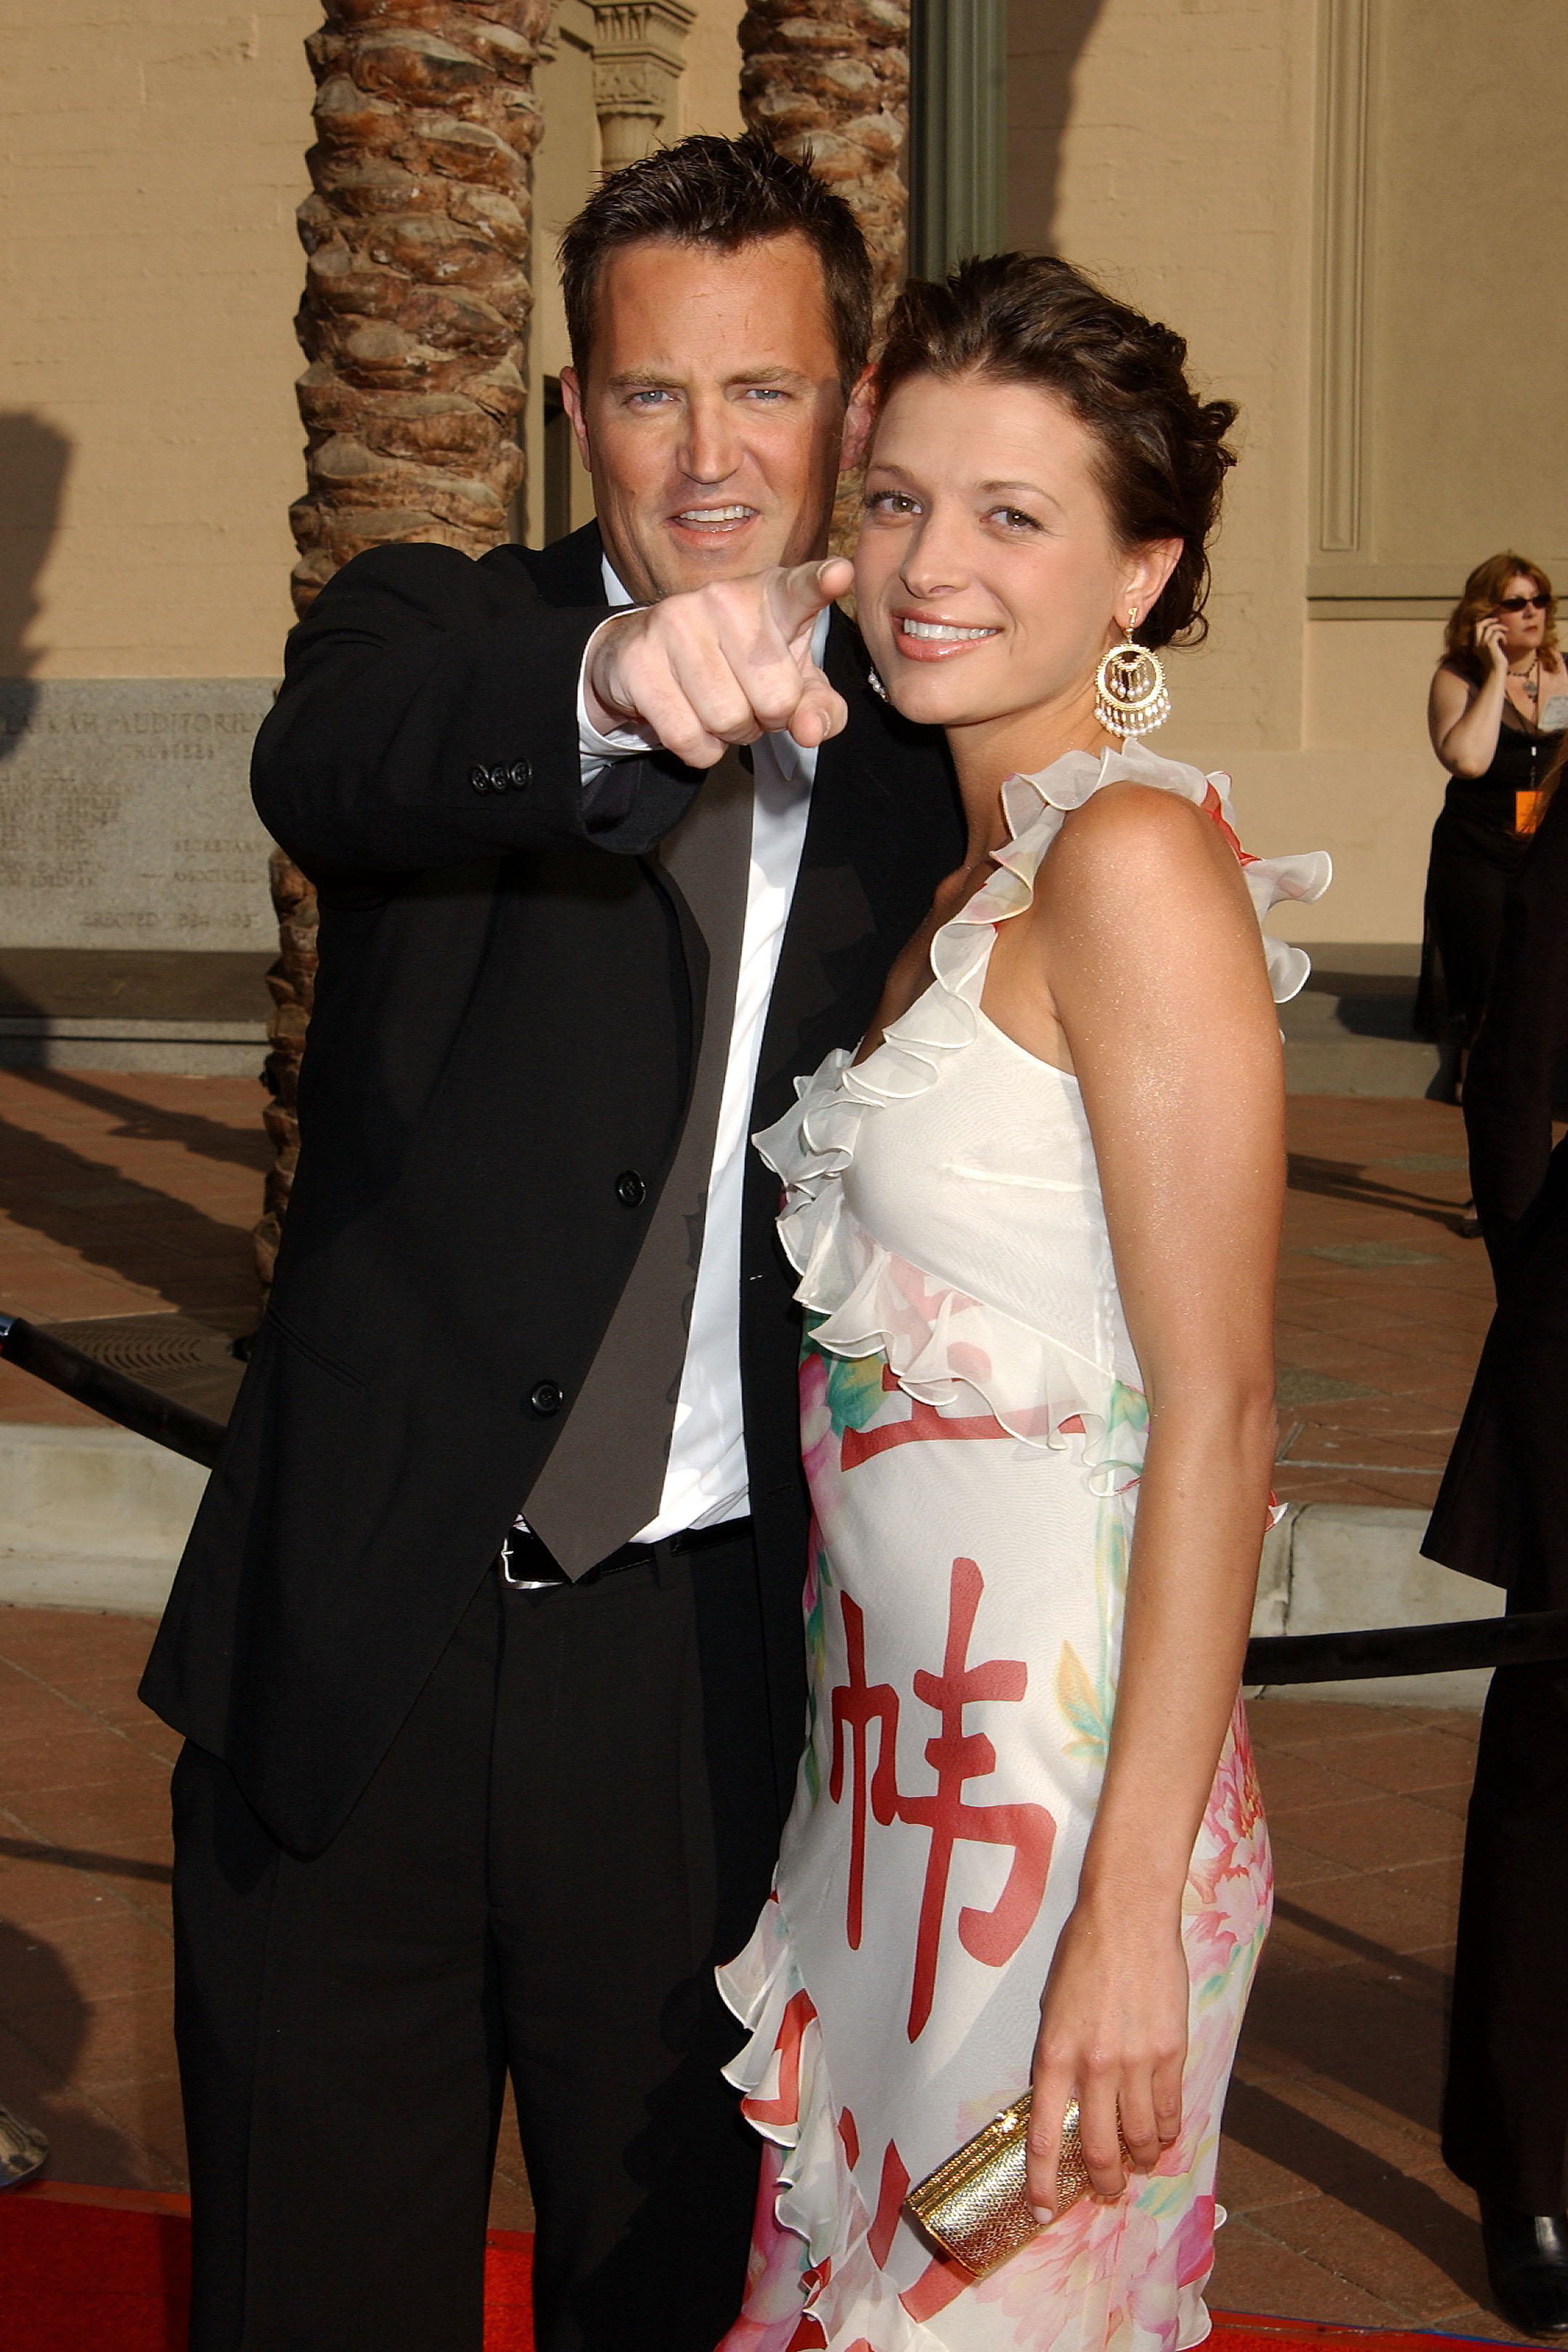 Matthew Perry and Rachel Dunn during the 2003 Emmy Creative Arts Awards on September 13, 2003, in Los Angeles, California. | Source: Getty Images